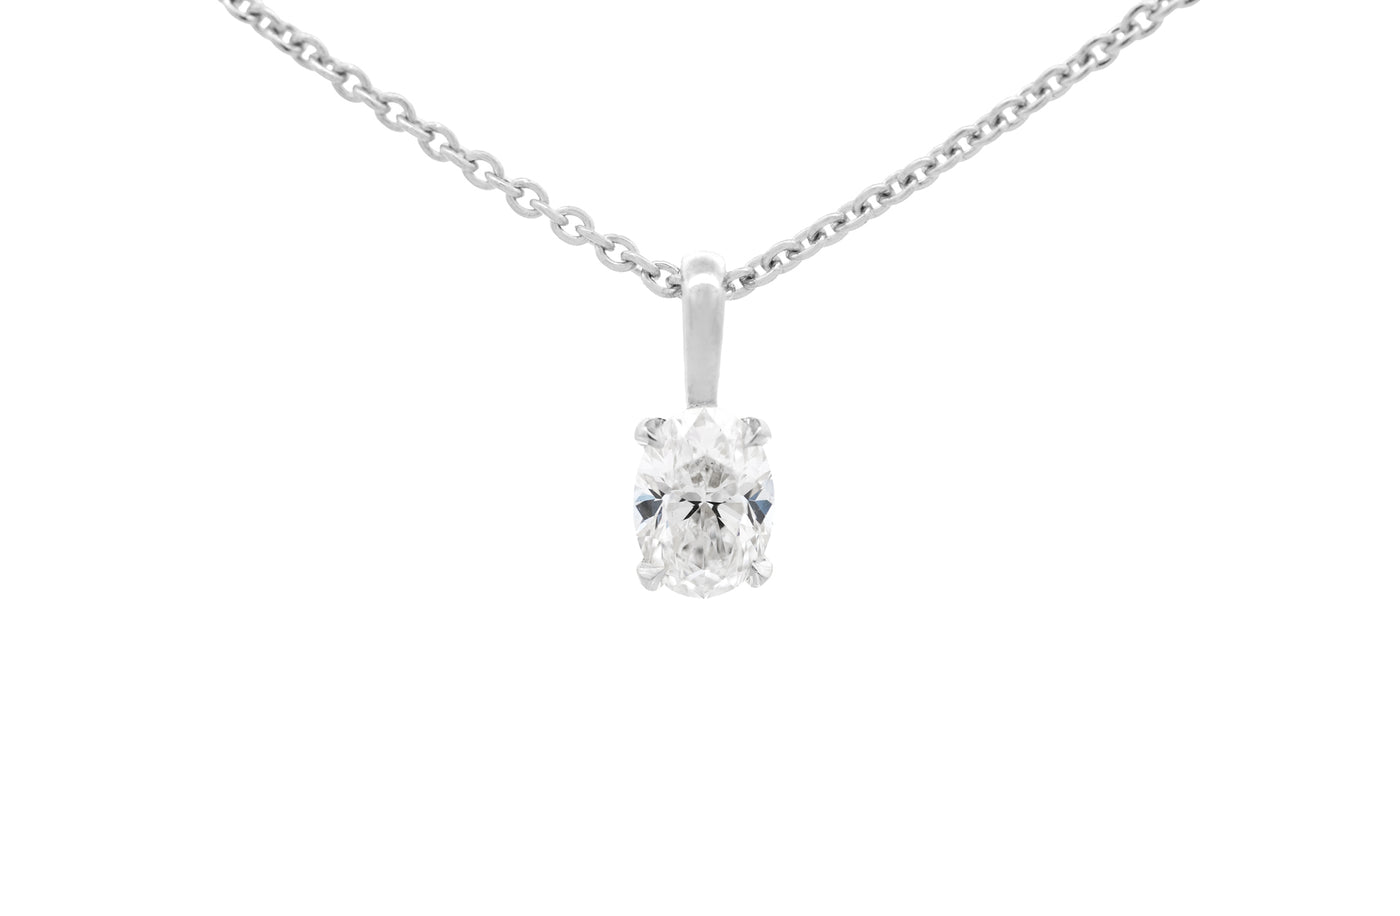 Oval Cut Diamond Solitaire Pendant in 18ct white gold or platinum